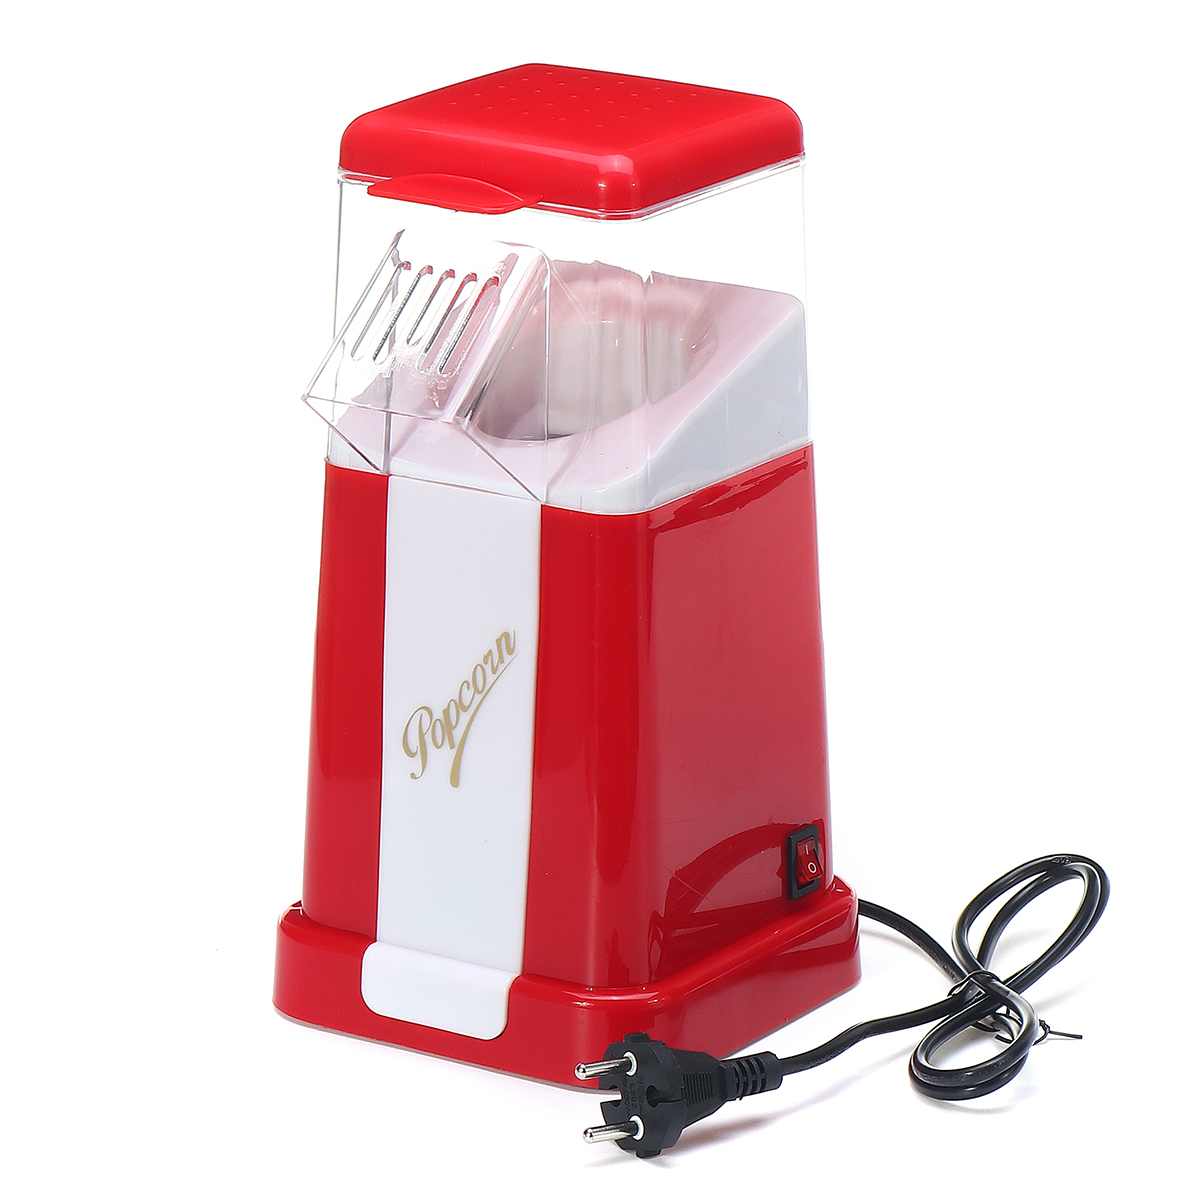 1200W-Mini-Electric-Popcorn-Maker-Home-Hot-Tabletop-Party-Snack-Machine-1728224-7